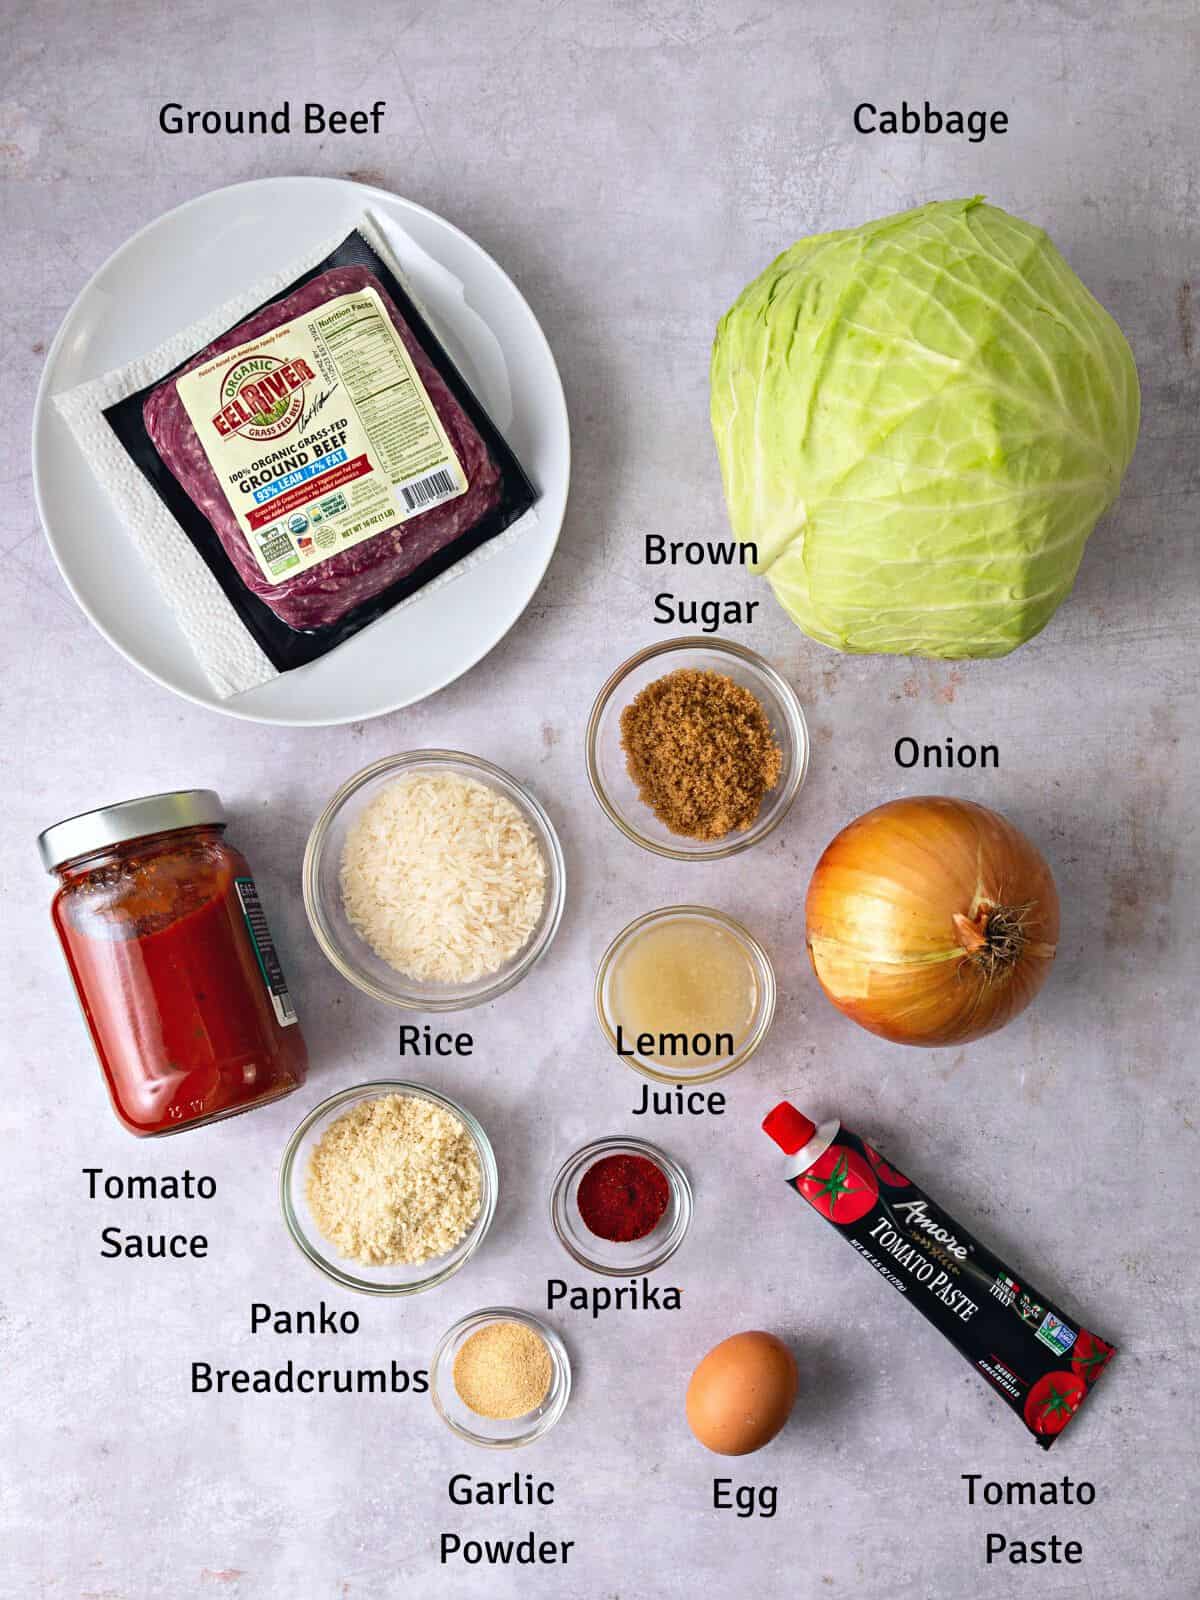 Ingredients for sweet and sour cabbage rolls, including rice, ground beef and brown sugar.